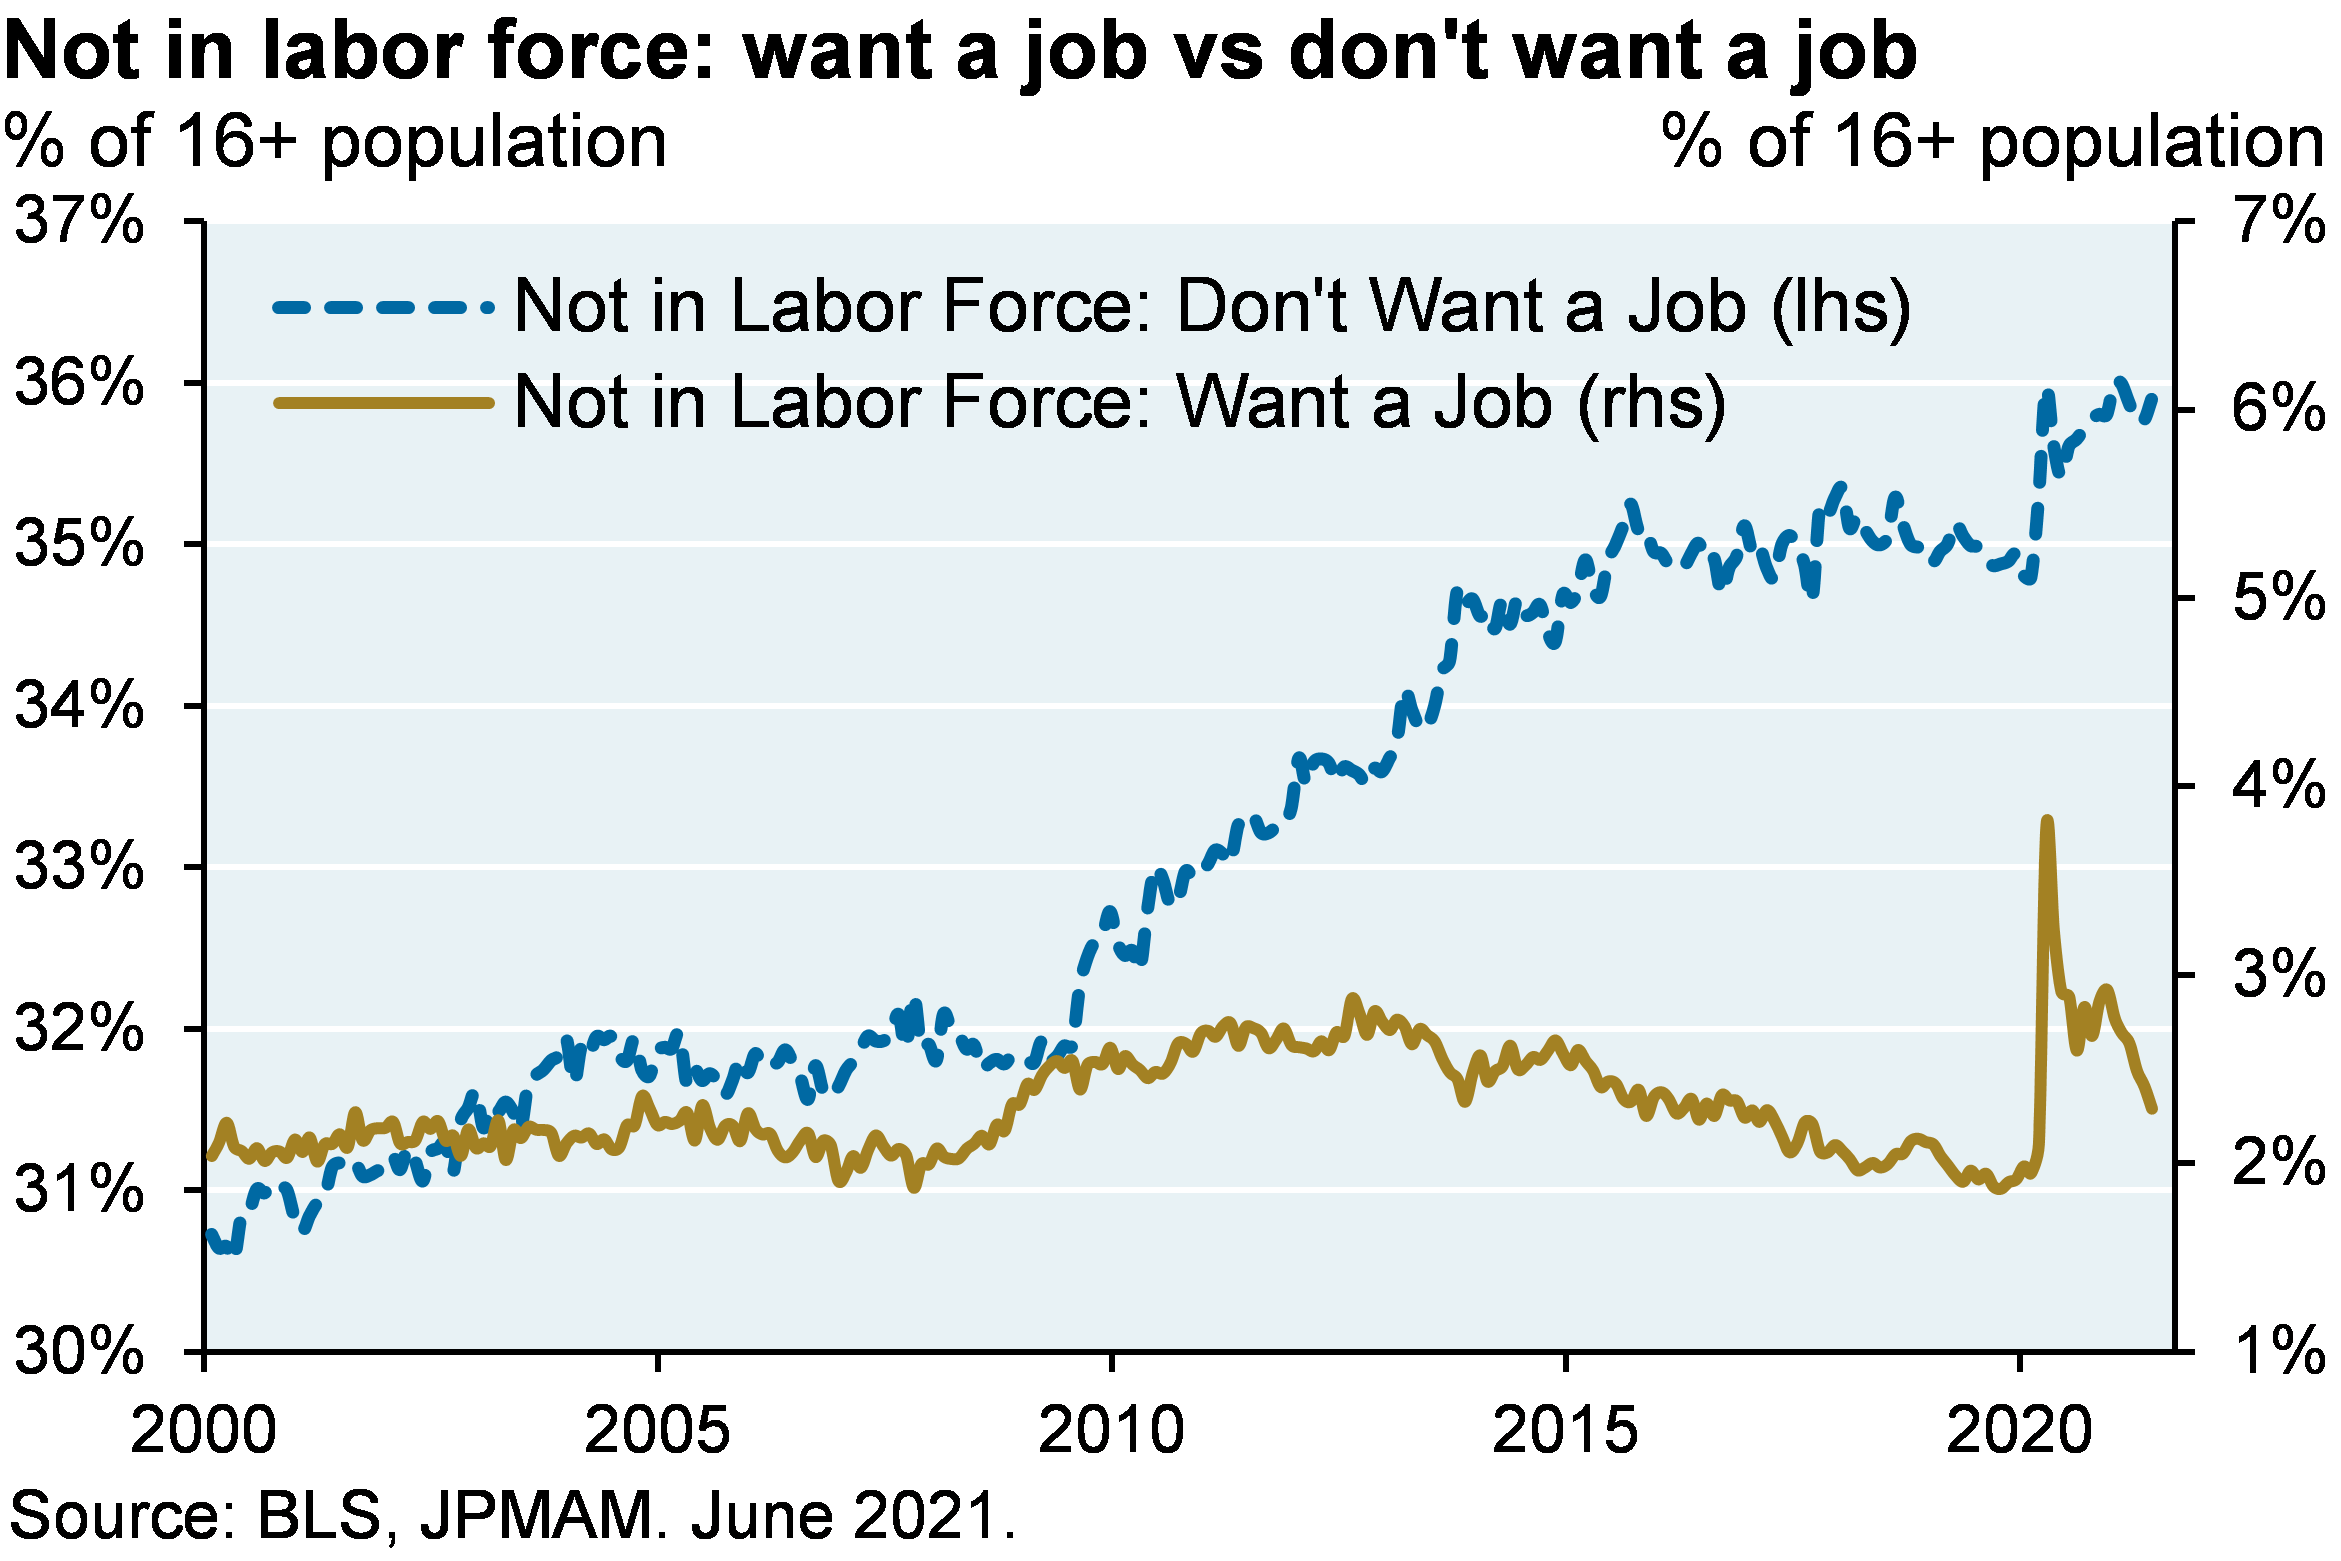 Line chart shows the % of the 16+ population not in labor force who want a job vs don’t want a job. Chart shows that the % of the population not in the labor force that wants a job was between 2-3% from 2000 to 2020 at which point the level spiked to almost 4%, but has since decreased to 2% at its most recent level. The % of the 16+ population not in labor force that does not want a job has steadily risen since 2000 to around 35% in 2020, then sharply increased to 36% in 2020, and has remained at that level through 2021. 